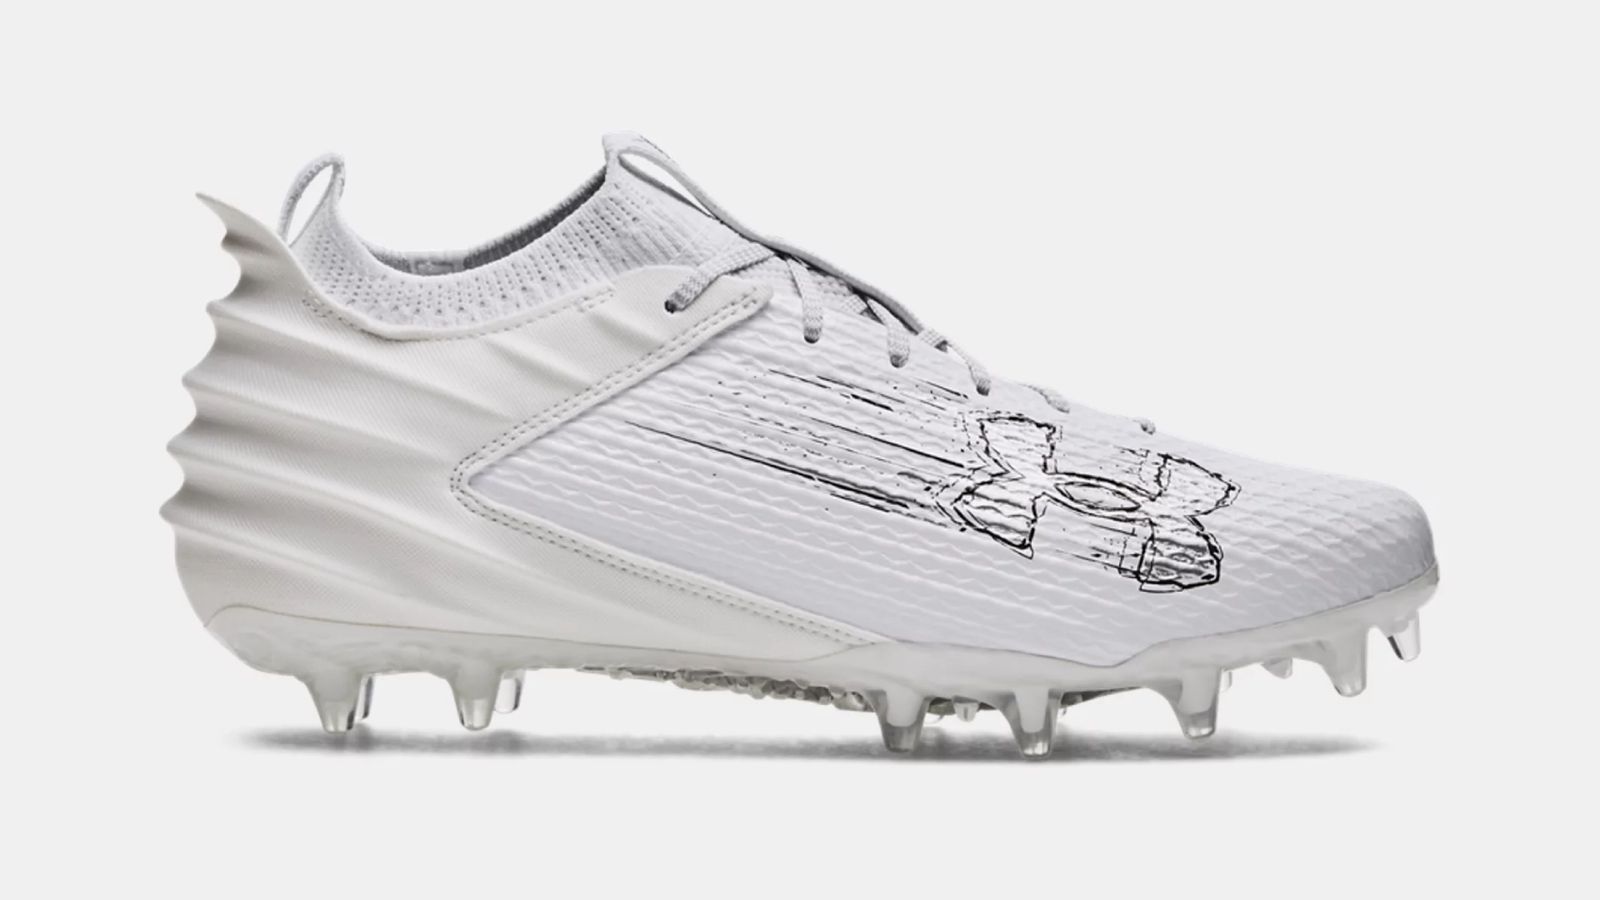 Under Armour Blur Smoke 2.0 MC product image of a white cleat with silver Under Armour branding on the side.